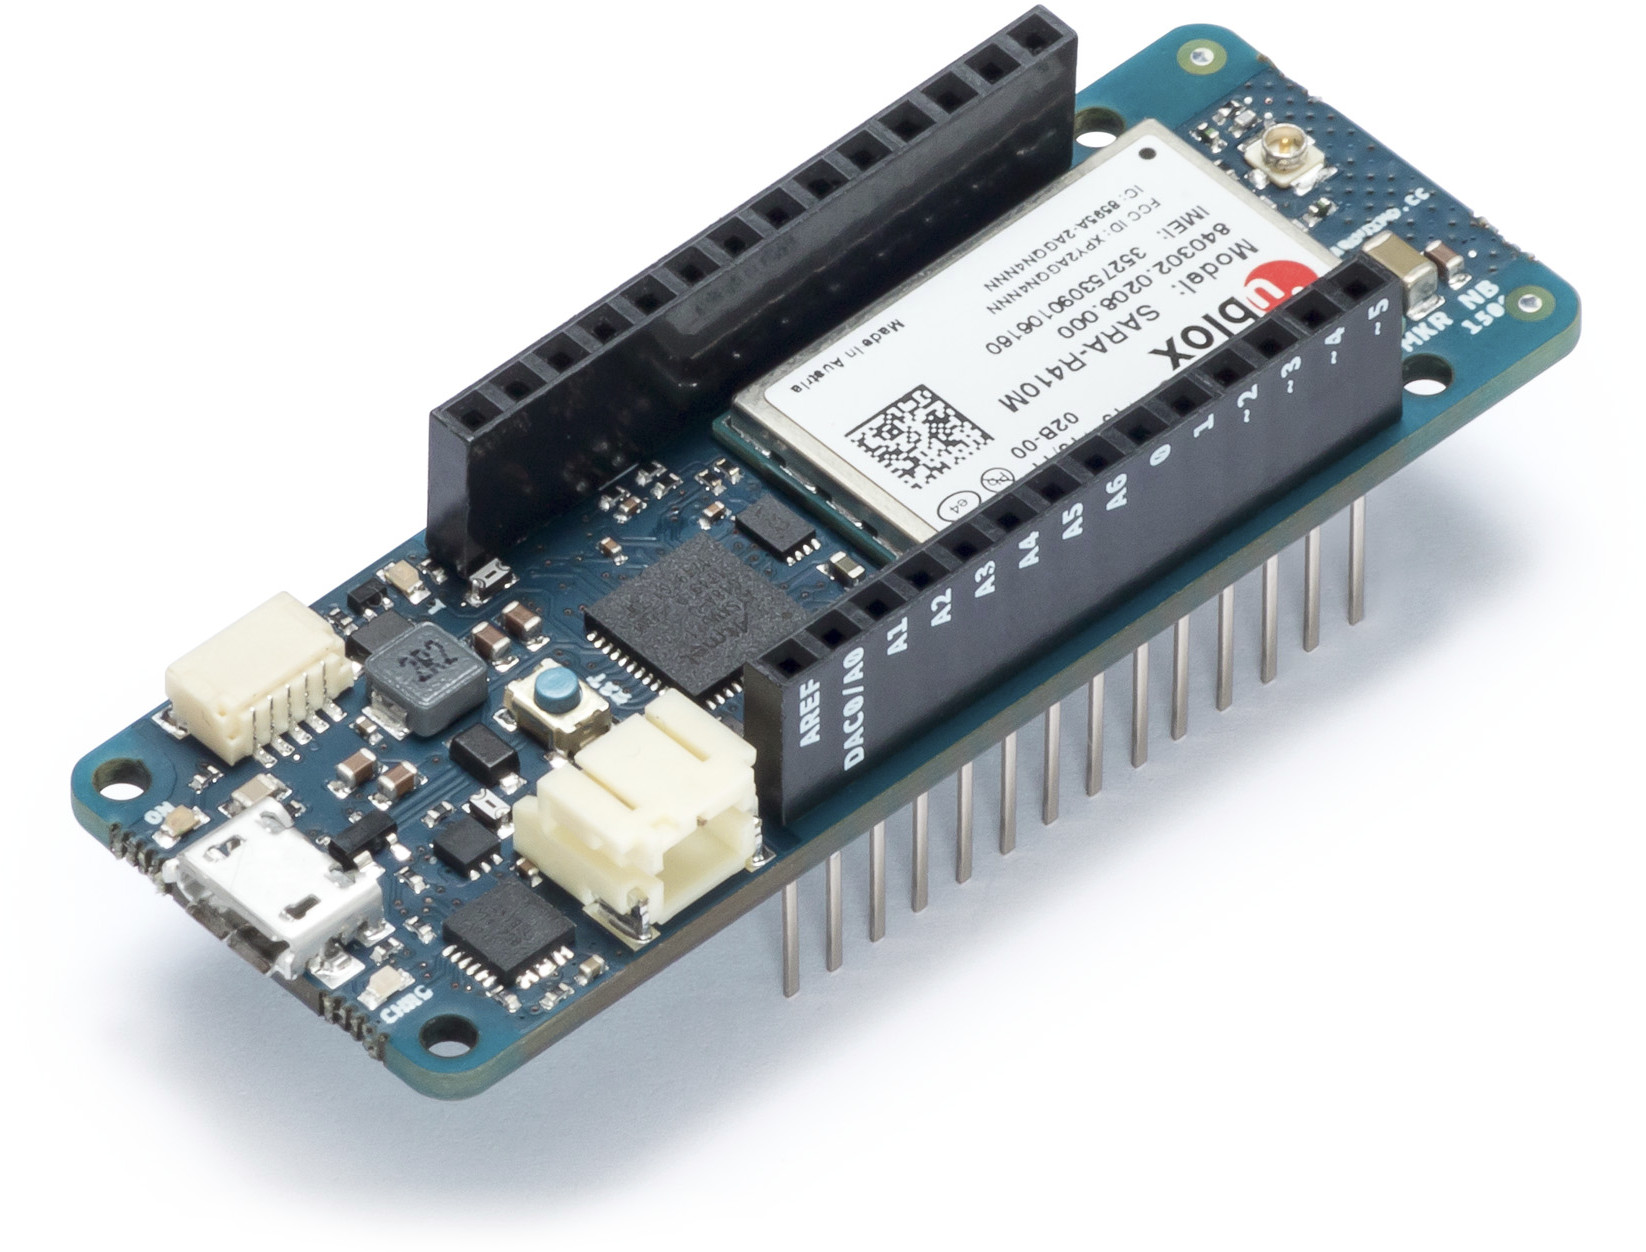 Arduino Introduces Two New IoT Boards - MKR WiFi 1010 ...